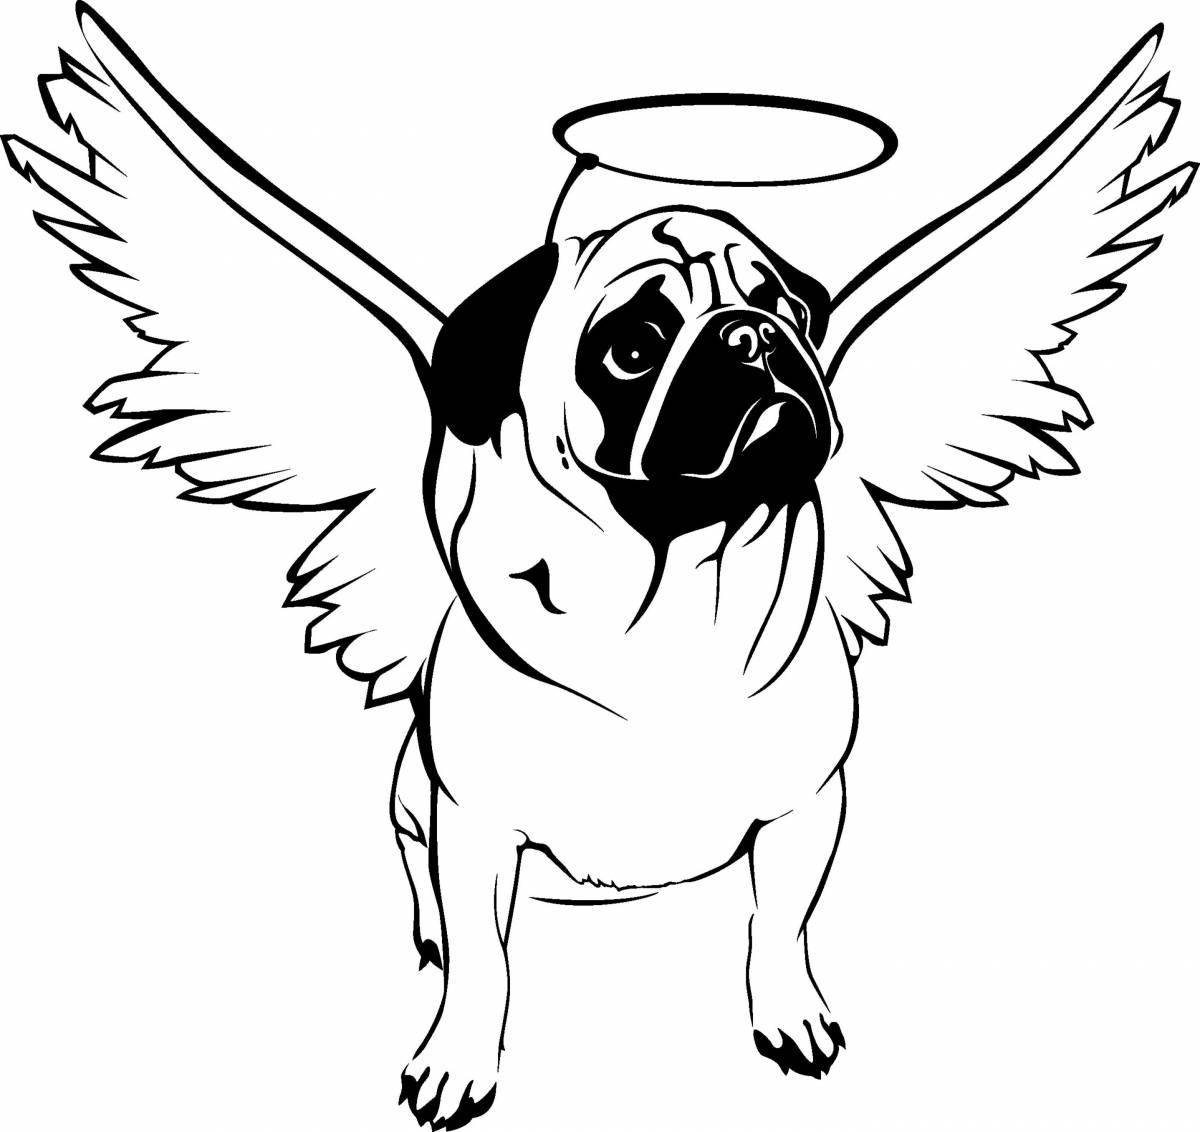 Animated pug coloring page